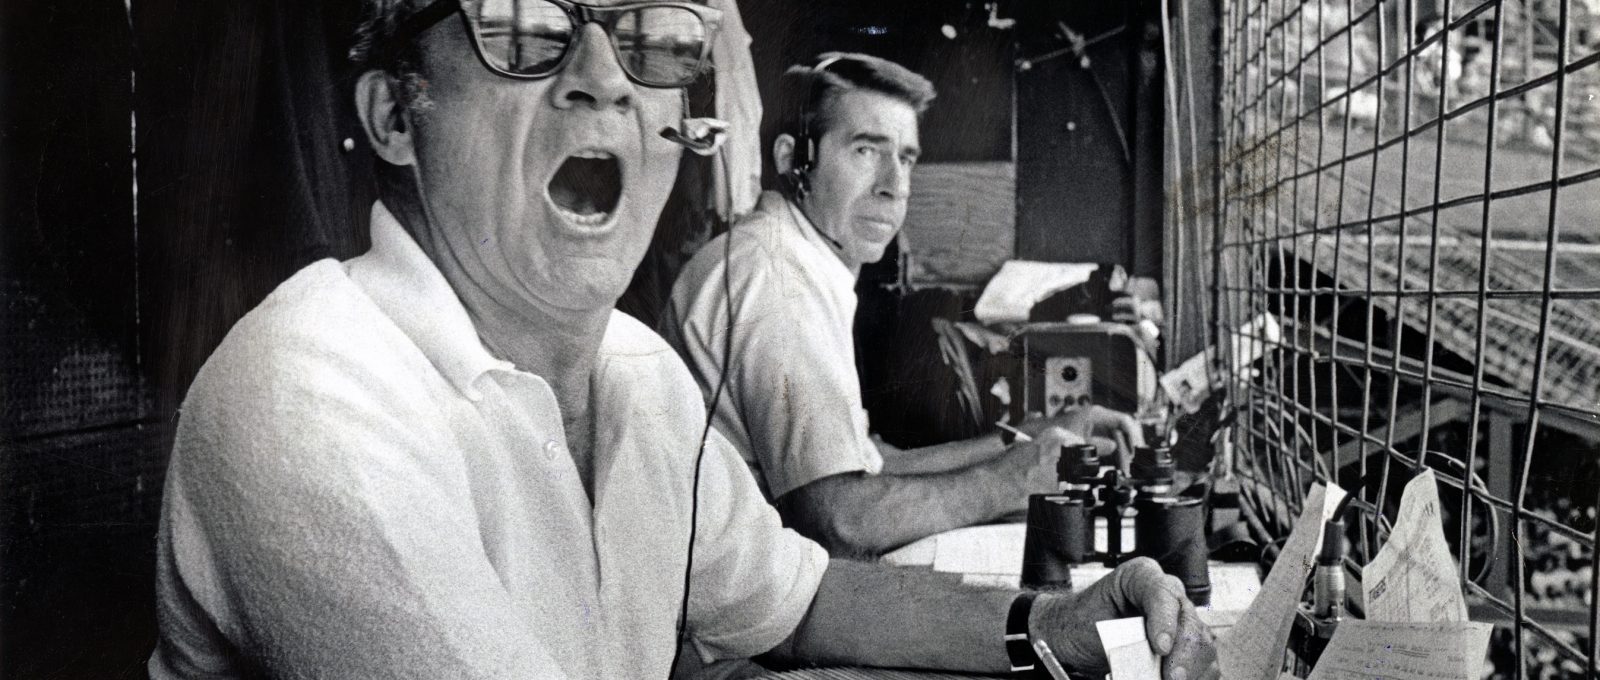 Ernie Harwell and Paul Carey Commentating in sports